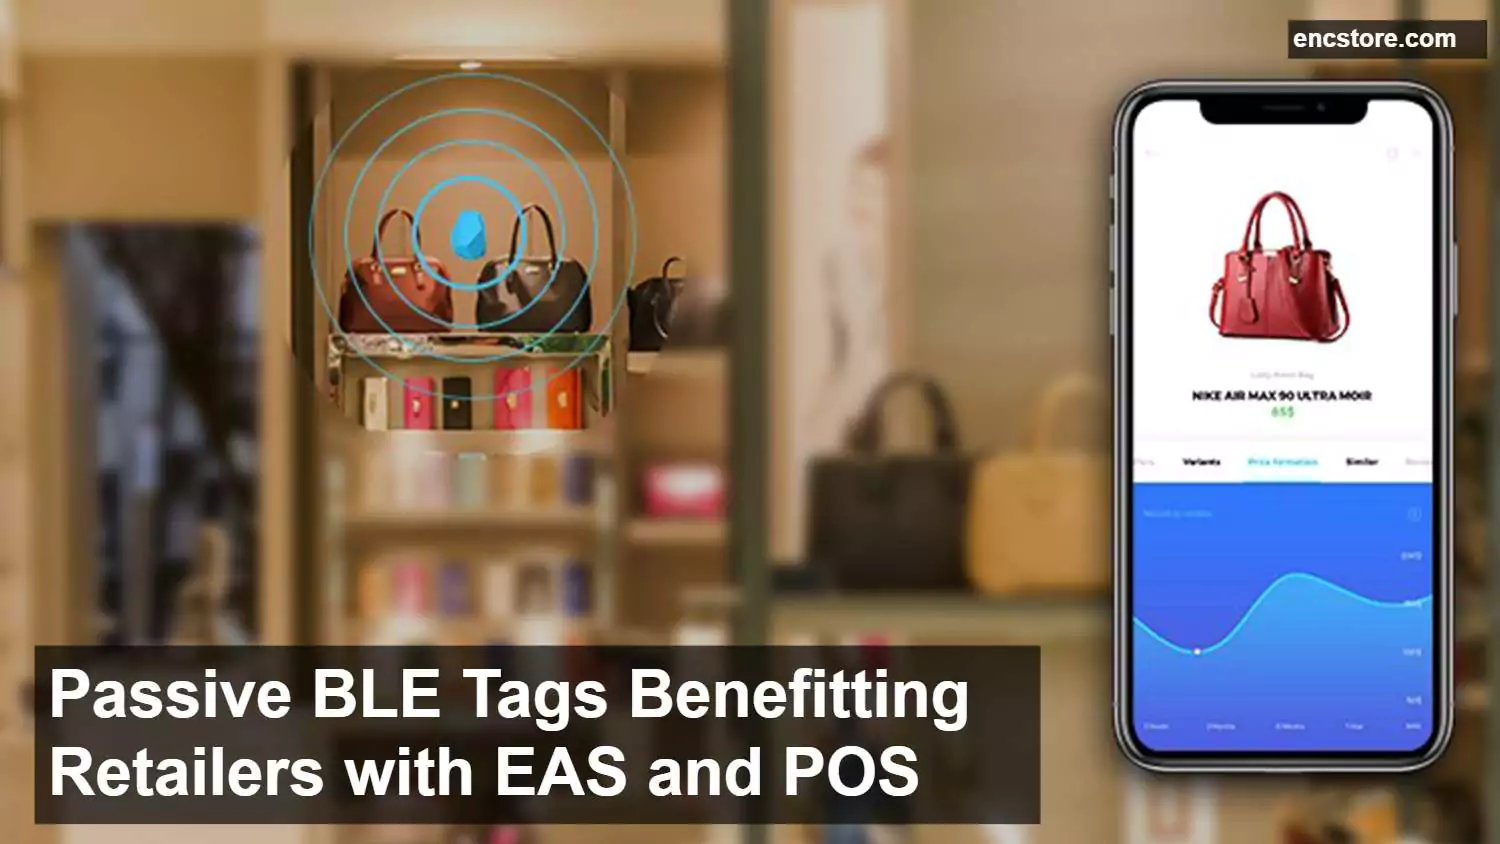 Passive BLE tags benefitting retailers with EAS and POS 